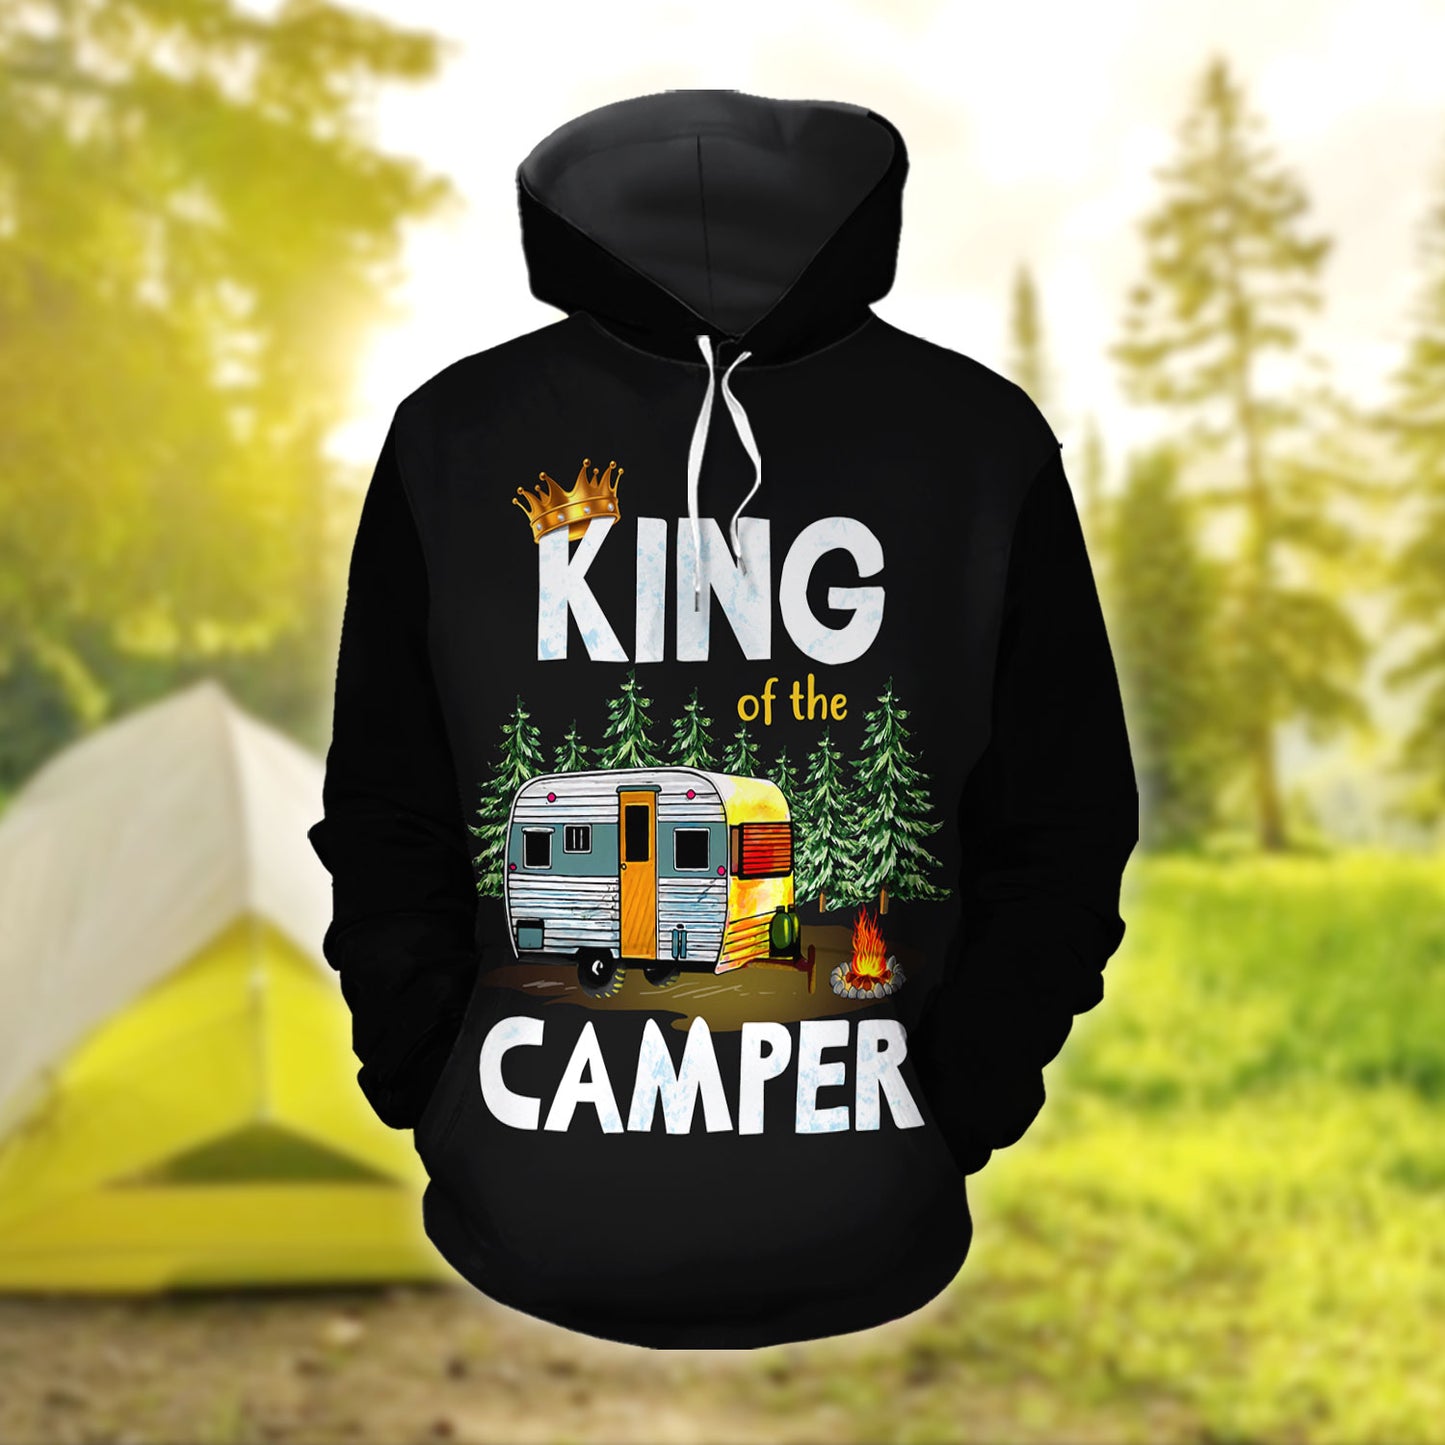 King And Queen Of The Camper Couple Hoodies Camping Gift Couple Matching Hoodie